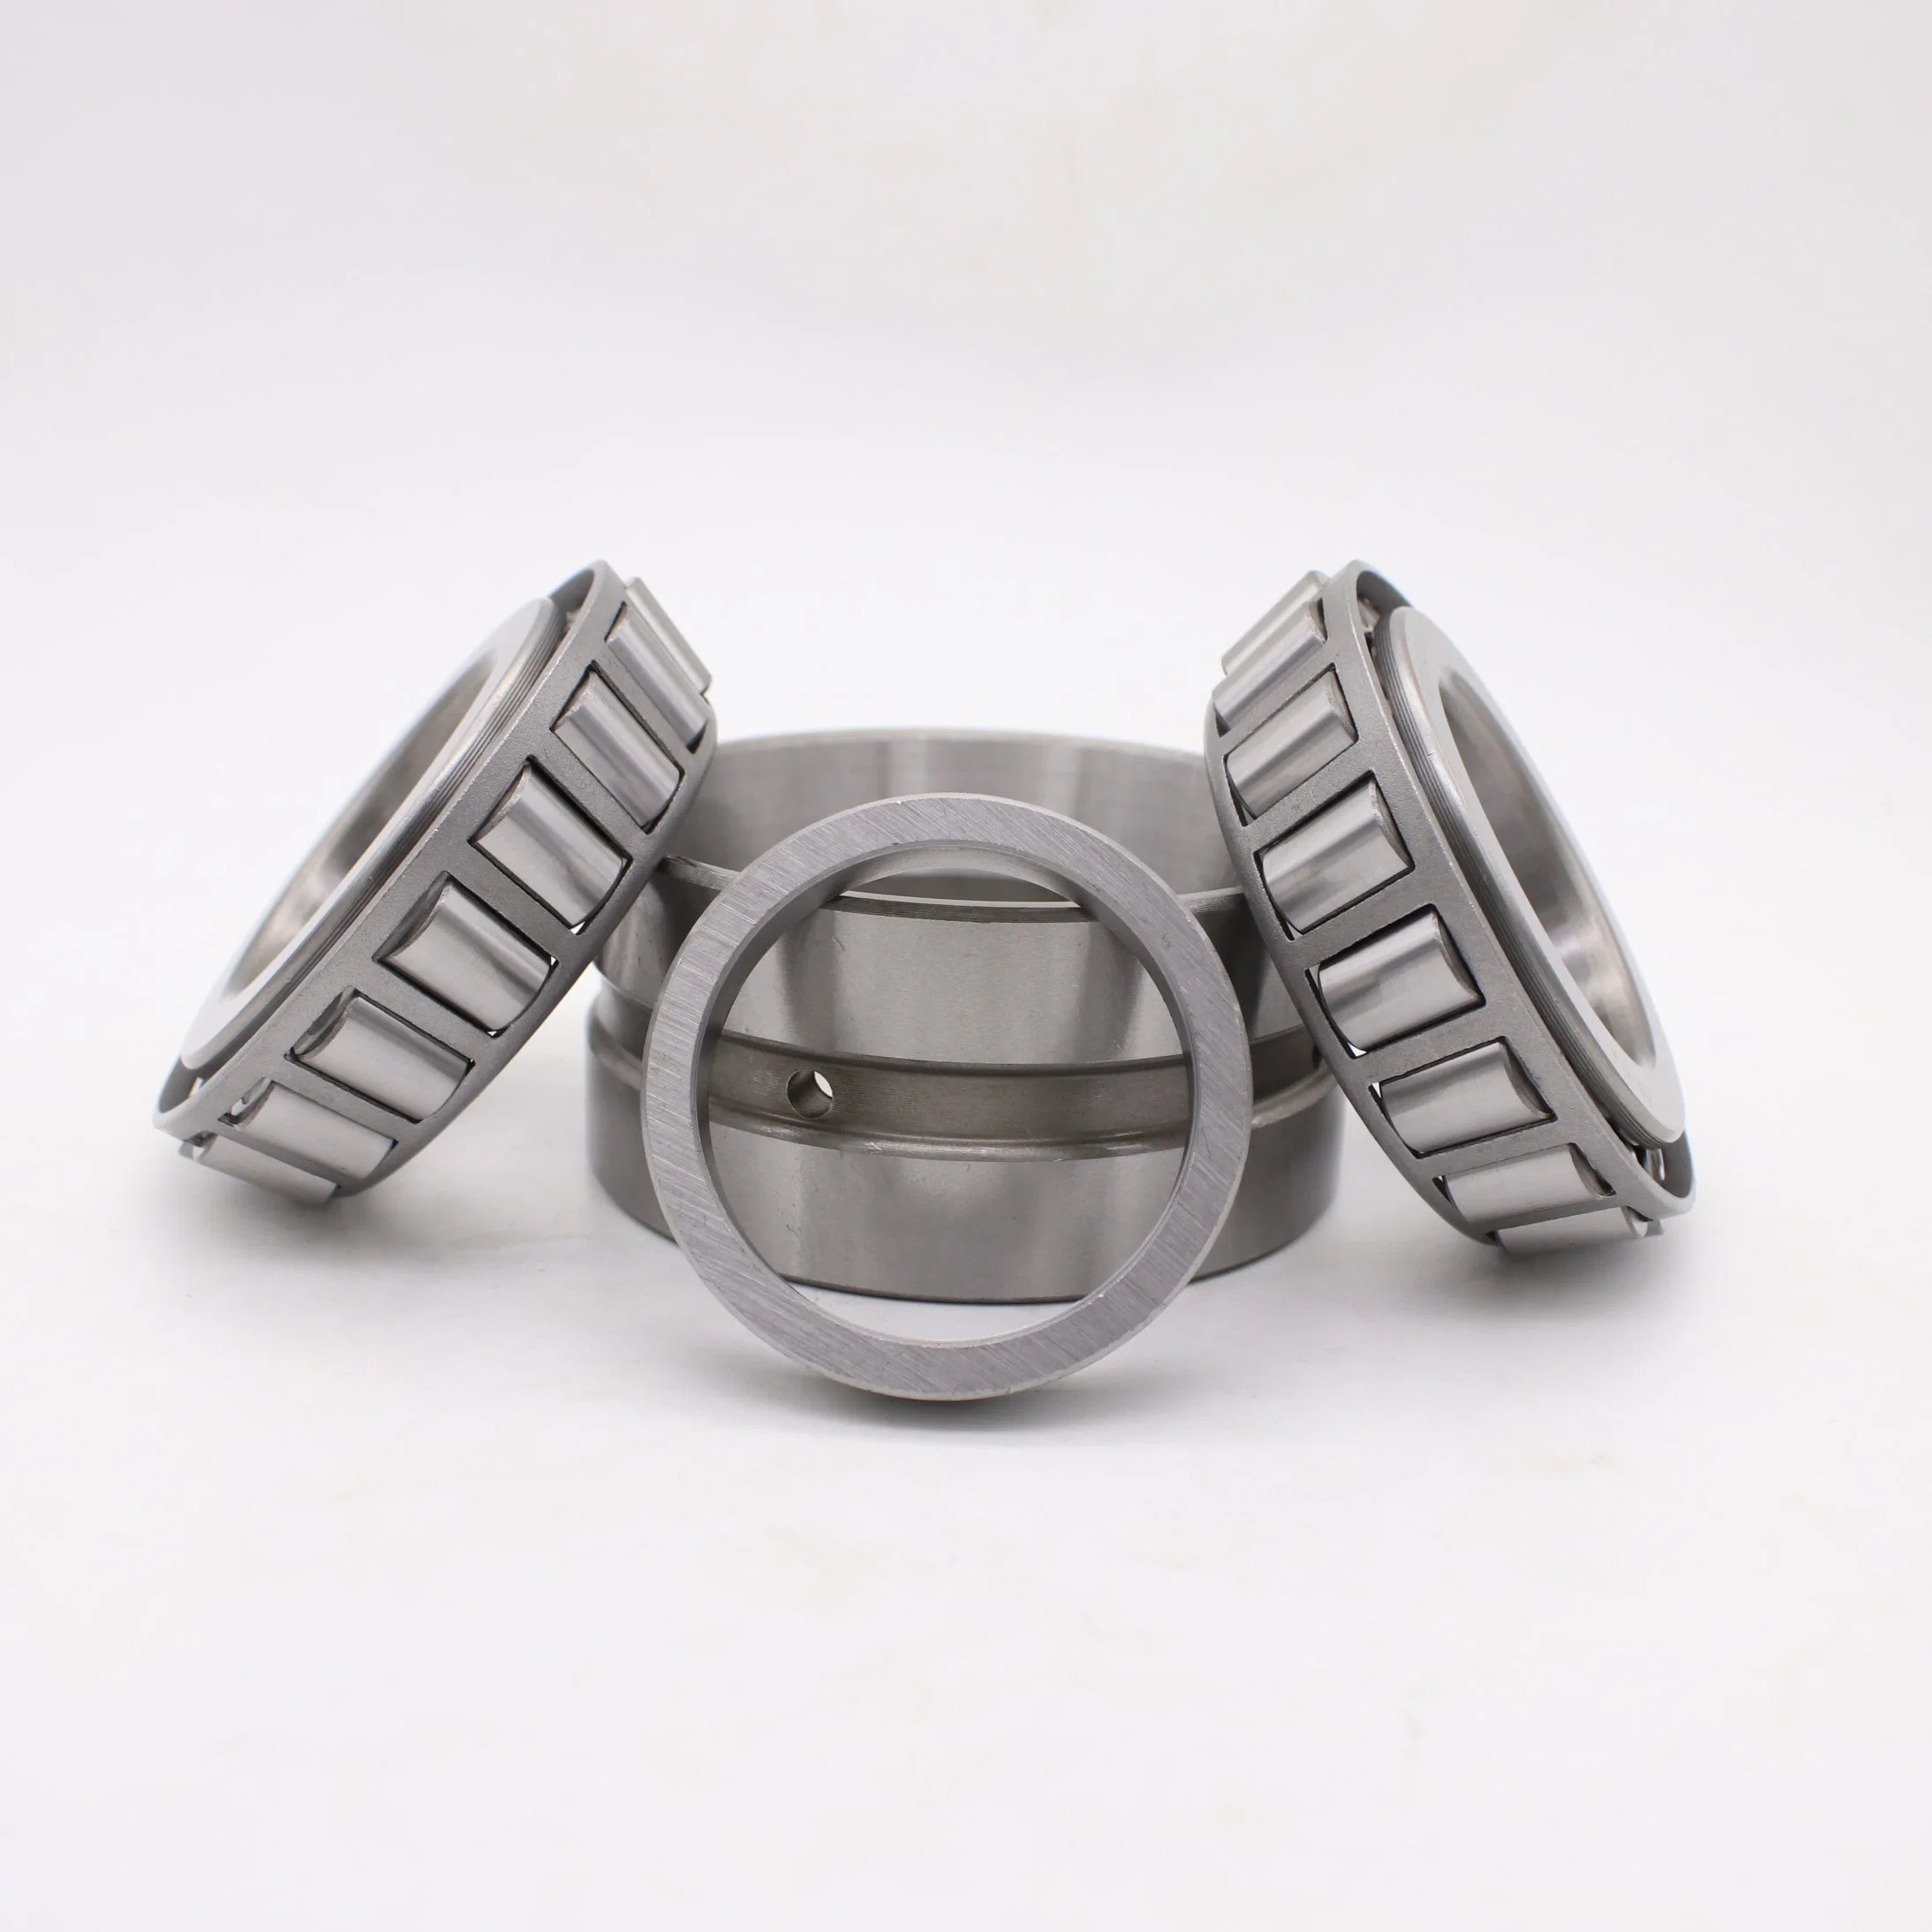 Wholesale High Speed and Low Noise Roller Bearings Taper Roller Bearing 32226 32228 32230 32232 32234 for Auto Parts